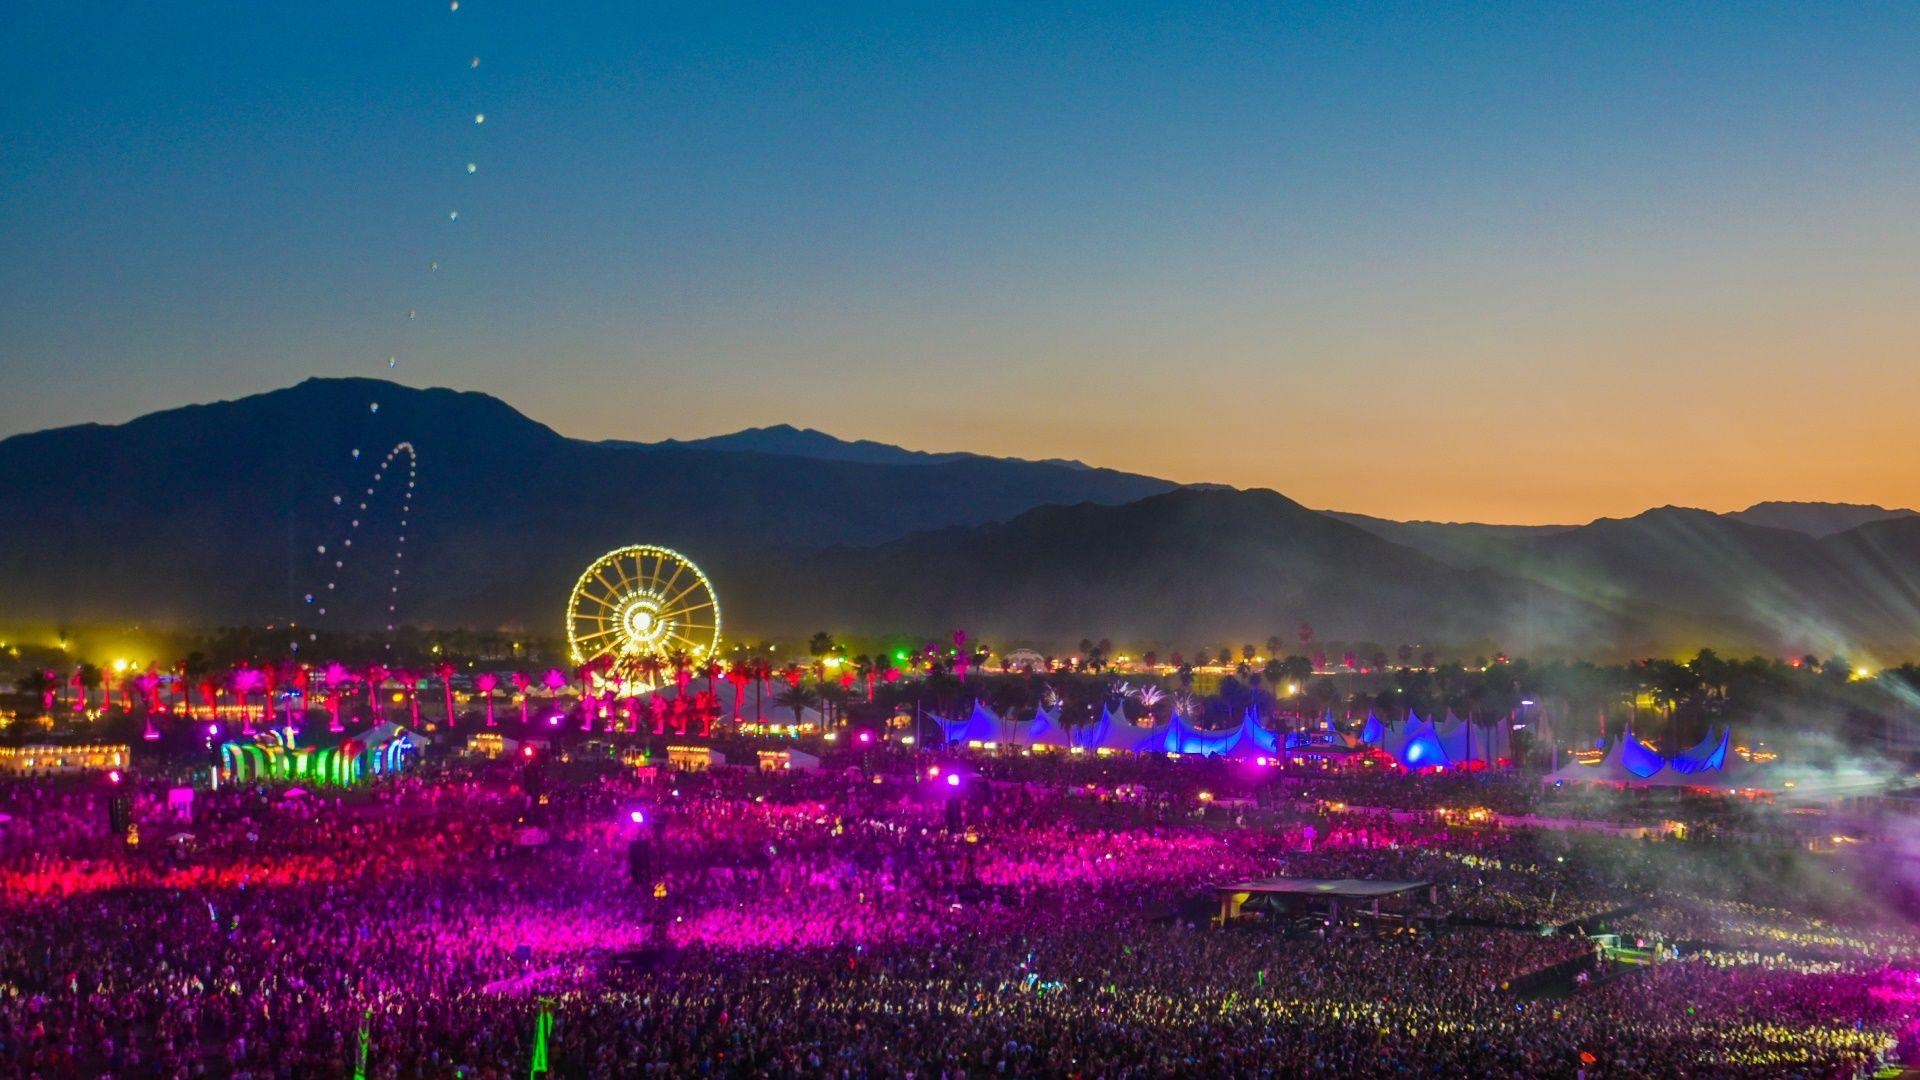 Coachella: The festival has been headlined by some of the biggest names in music, including Beyonce, Eminem, Muse, and Radiohead. 1920x1080 Full HD Background.